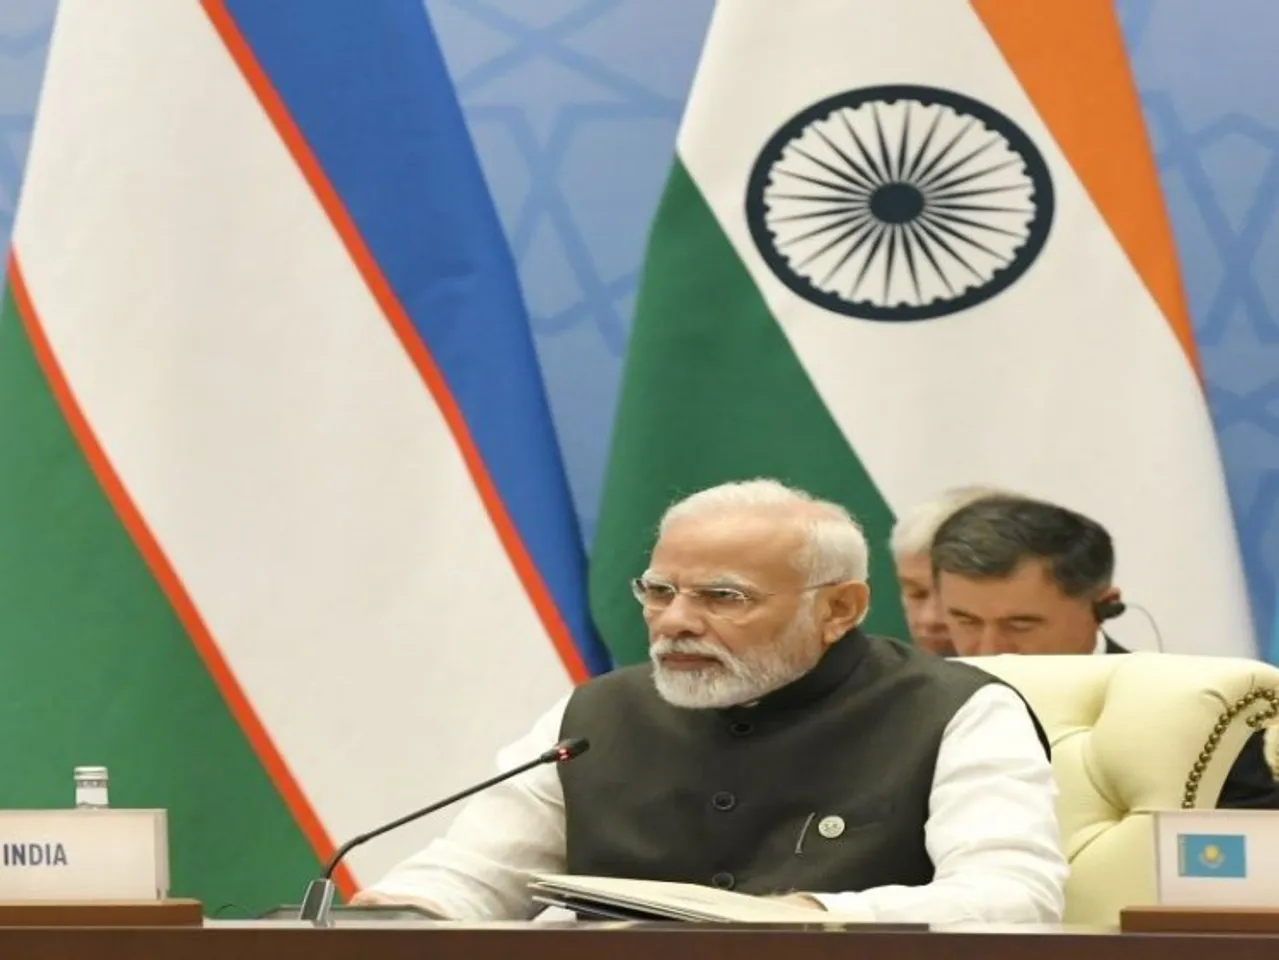 Prime Minister Narendra Modi addressing council of Heads of States Shanghai Cooperation Organization at Congress Centre in Samarqand, Uzbekistan